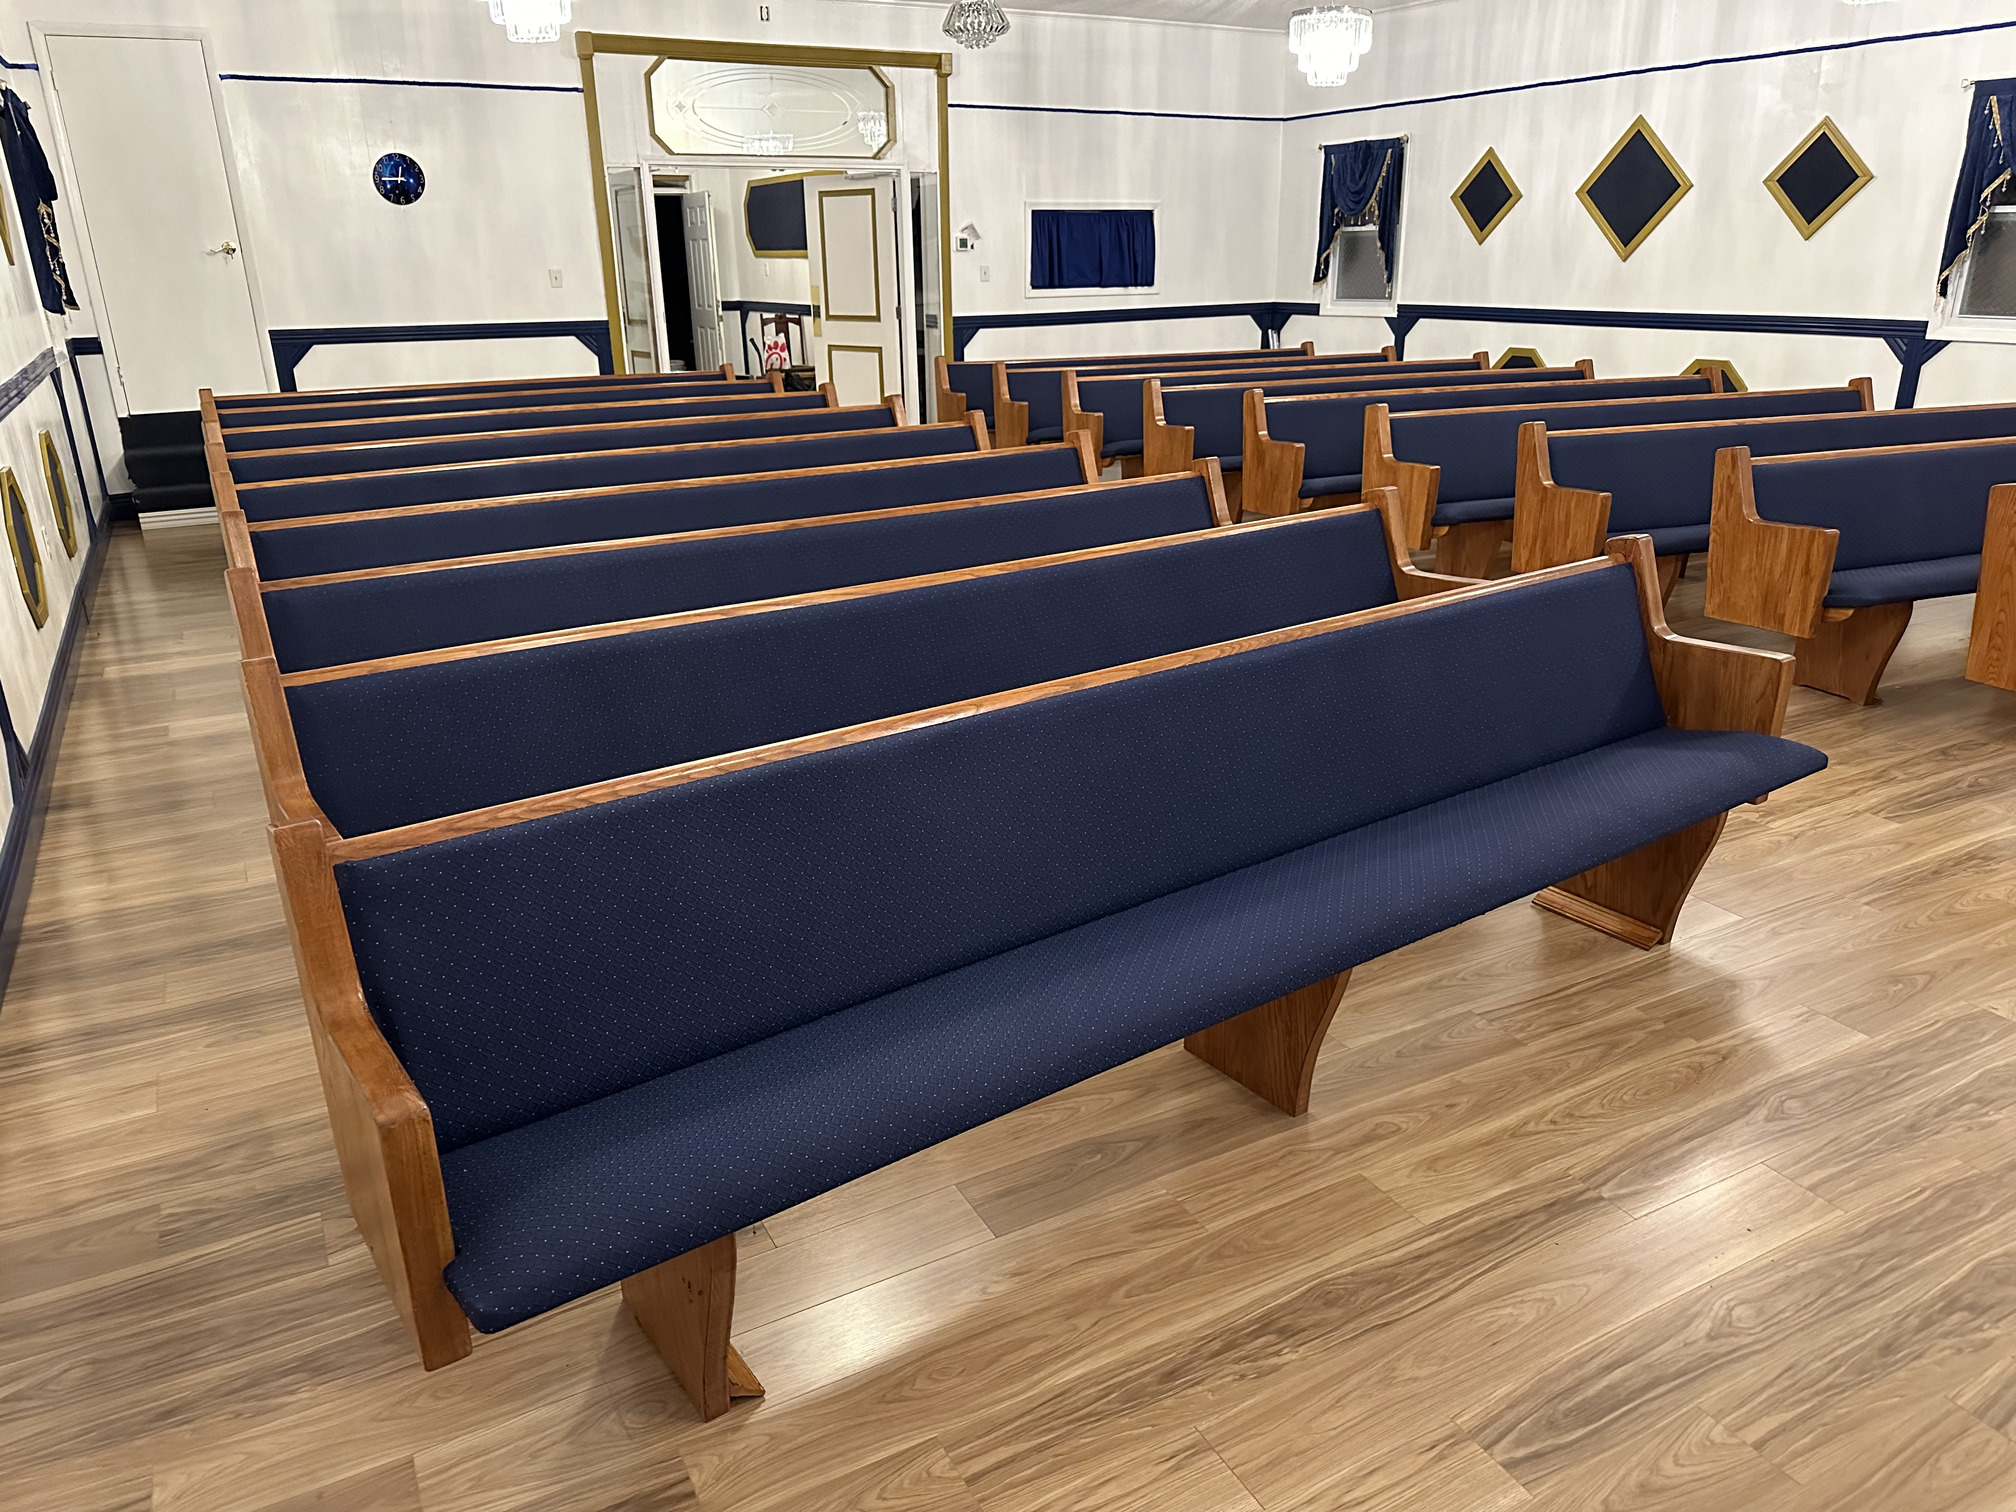 closer right front view of church pew upholstery Elizabethtown Kentucky performed by Woods Church Interiors nationwide pew upholstery service